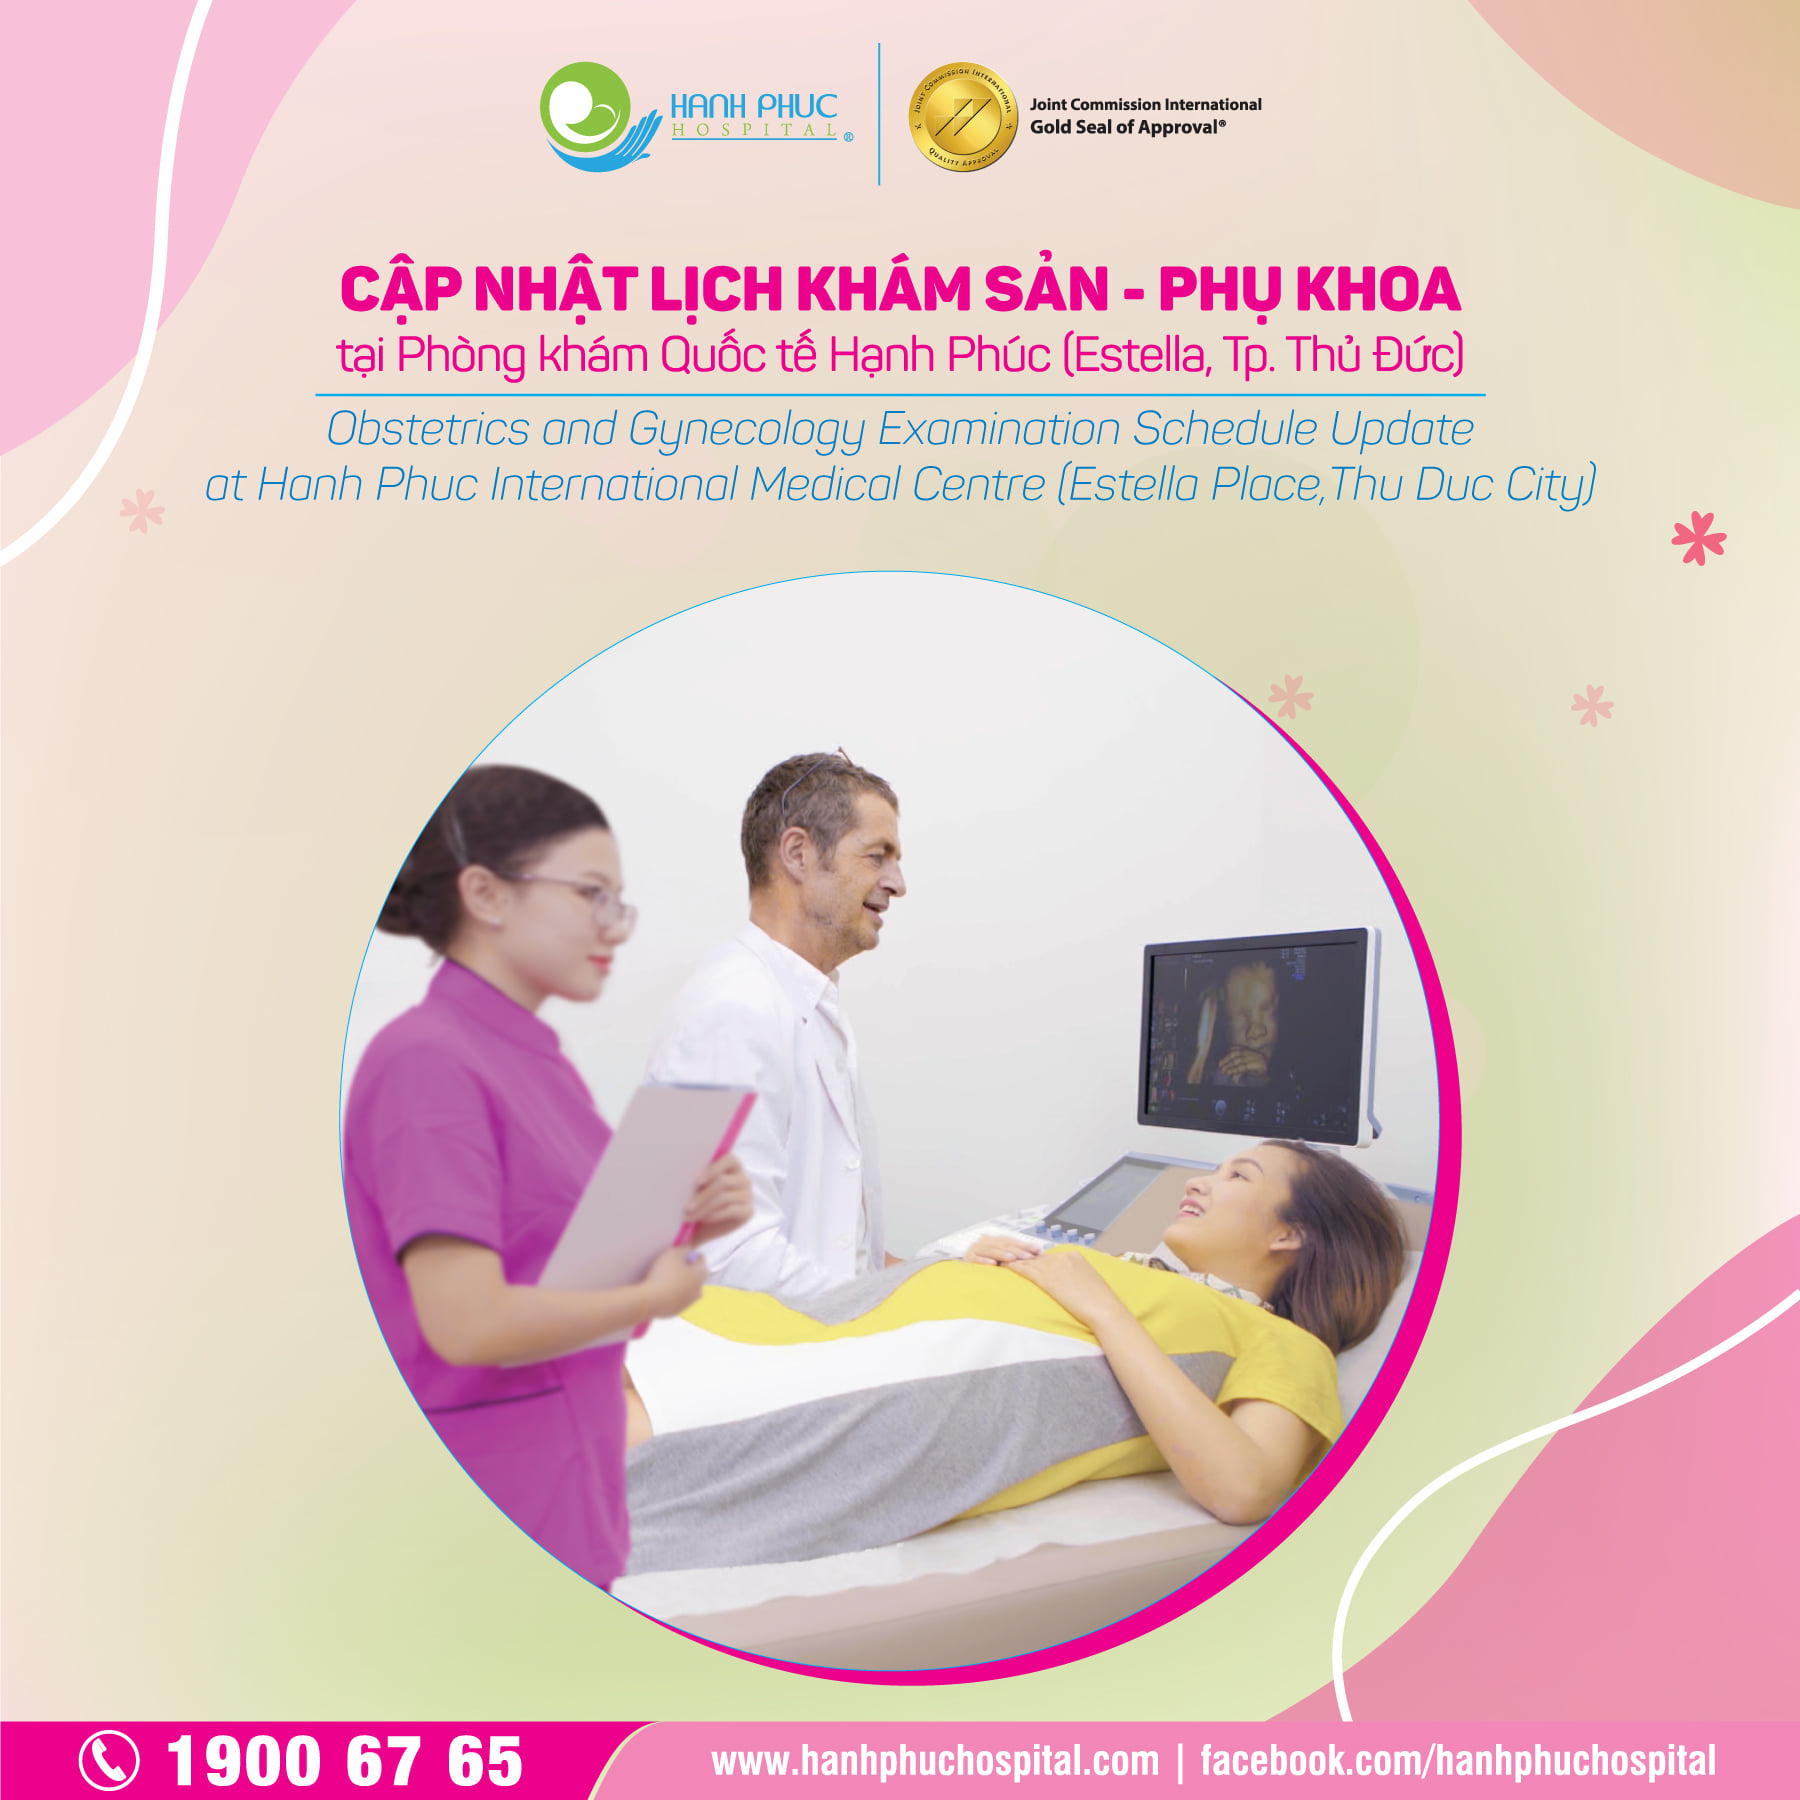 📣 ANNOUNCEMENT – Obstetrics & Gynecology examination services at Hanh Phuc